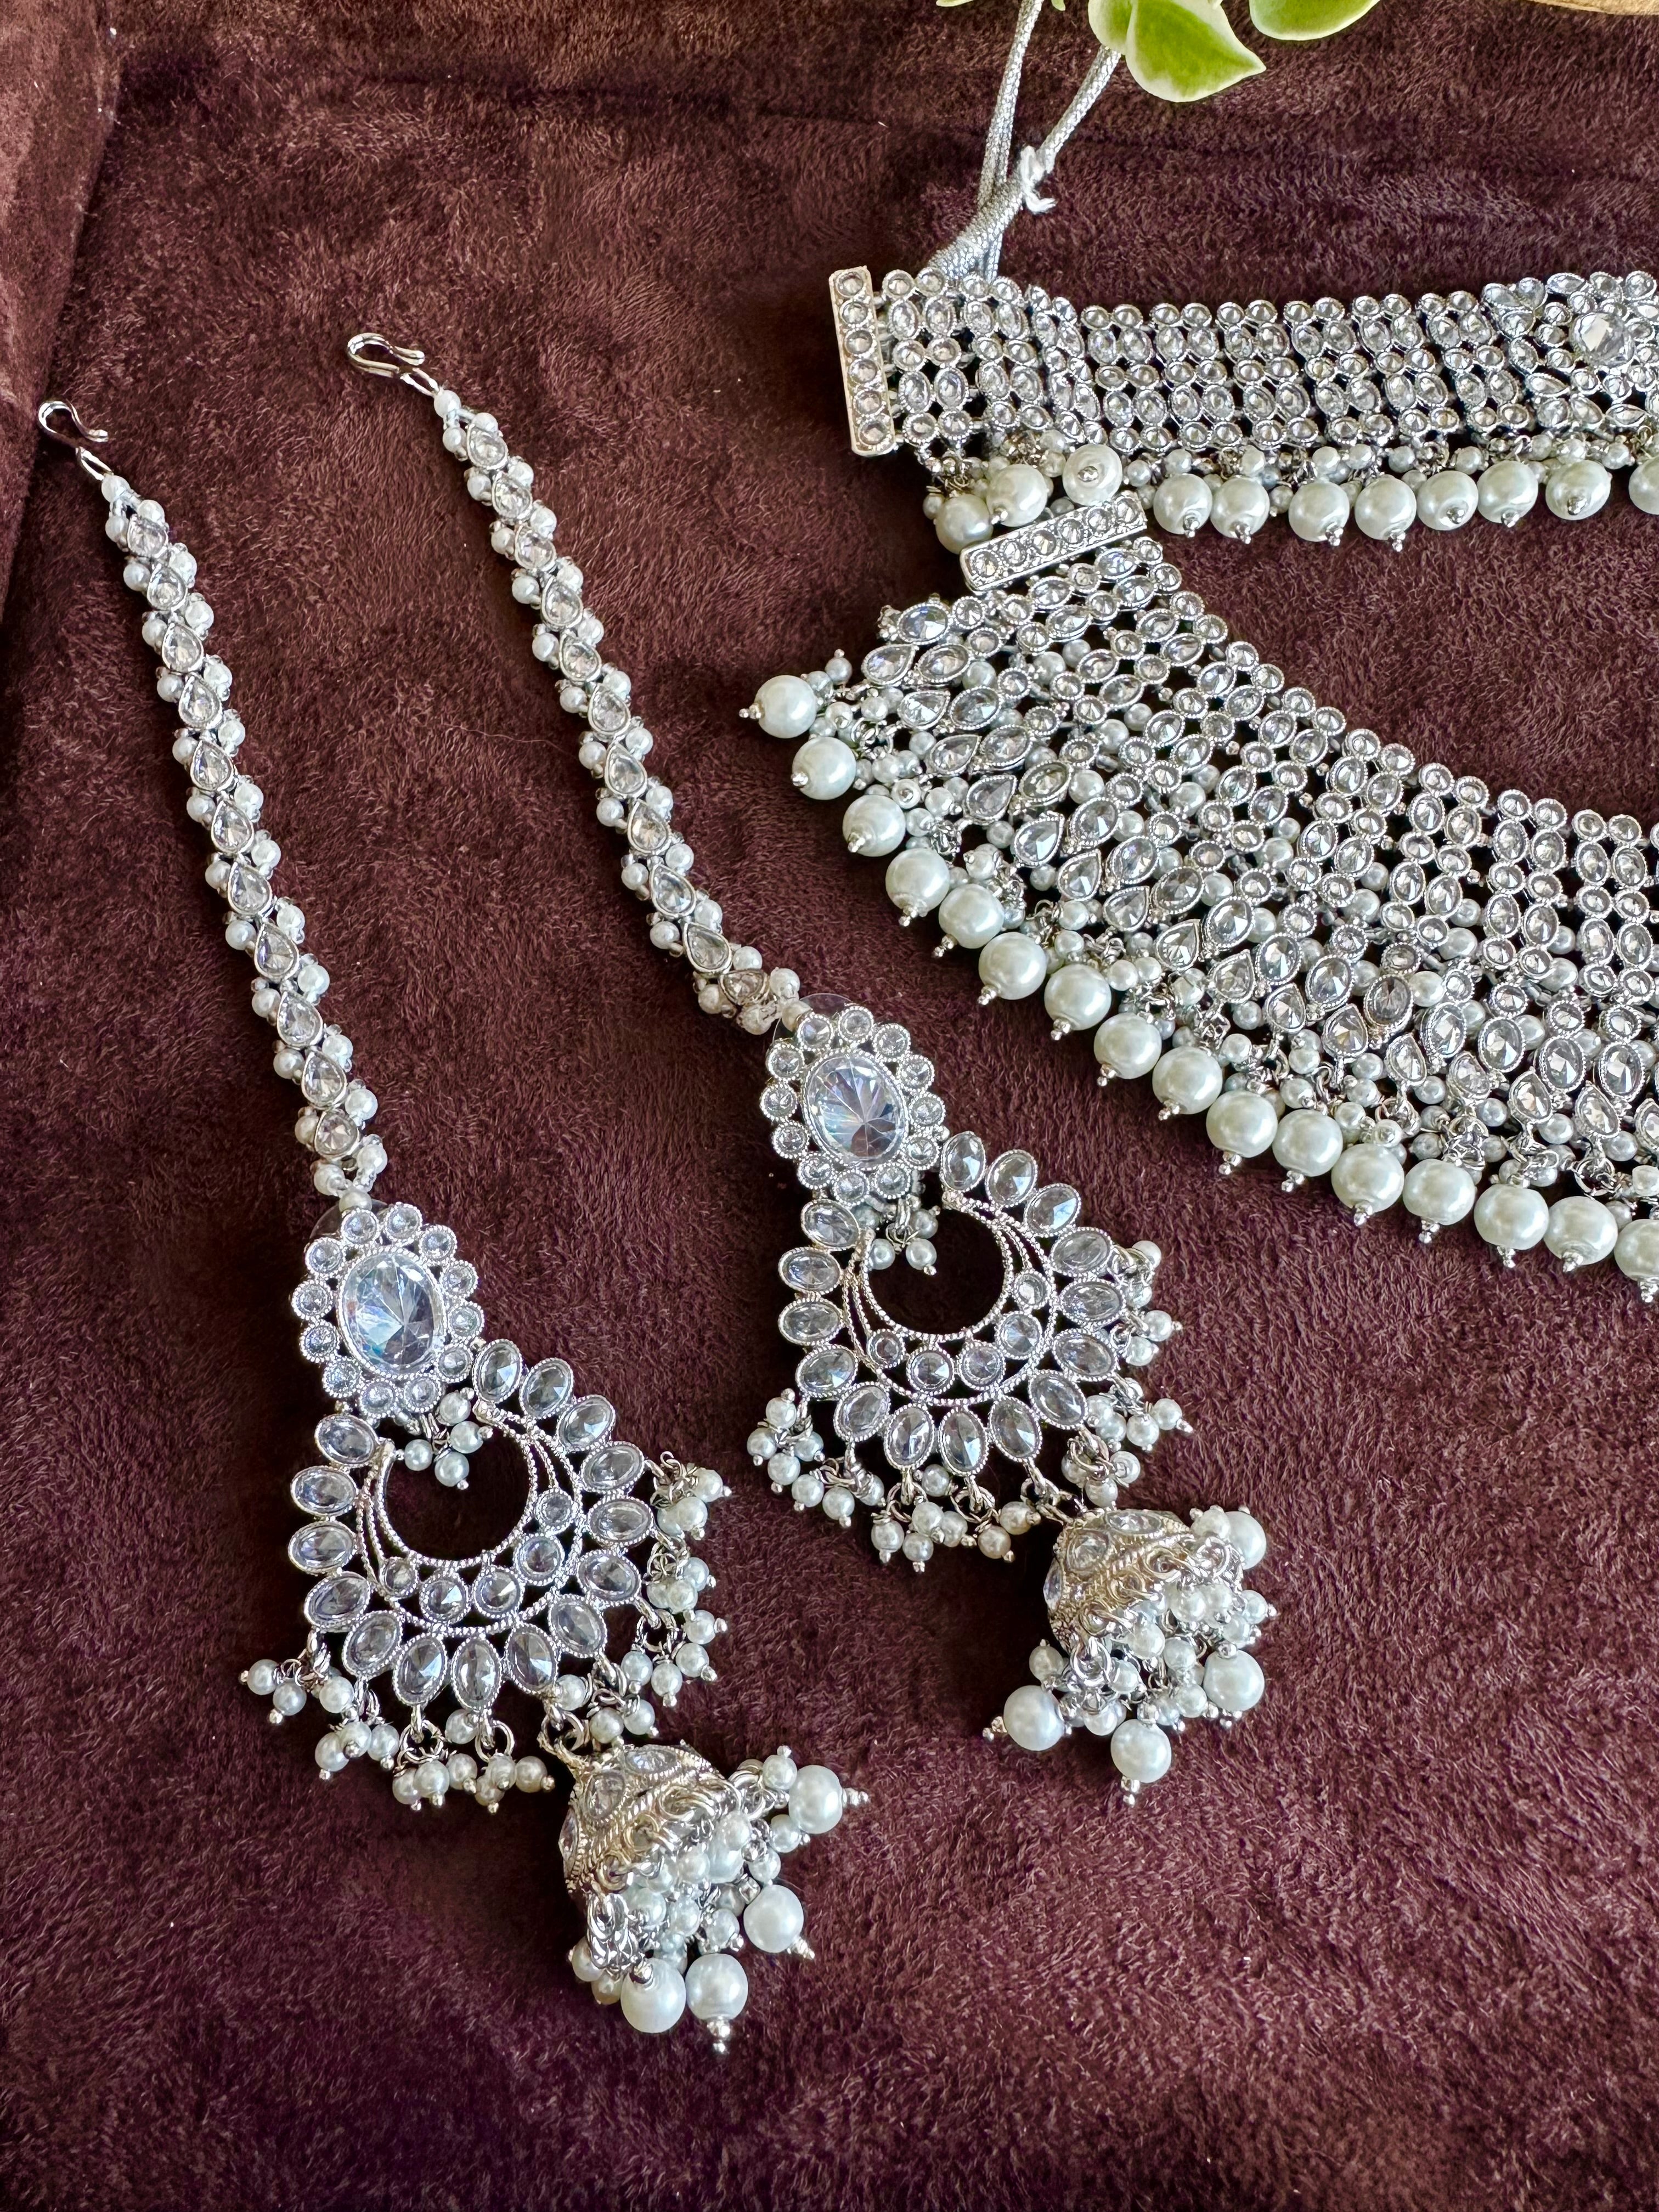 The Krishna Necklace set exudes opulence, pair it with your favorite lehenga or saree to achieve a regal bridal look We can customize the colors to your liking, let us know on whatsapp at +1 (313)-727-1045 if you have any questions. We are very proud of our highest quality and specialized craftsmanship. 